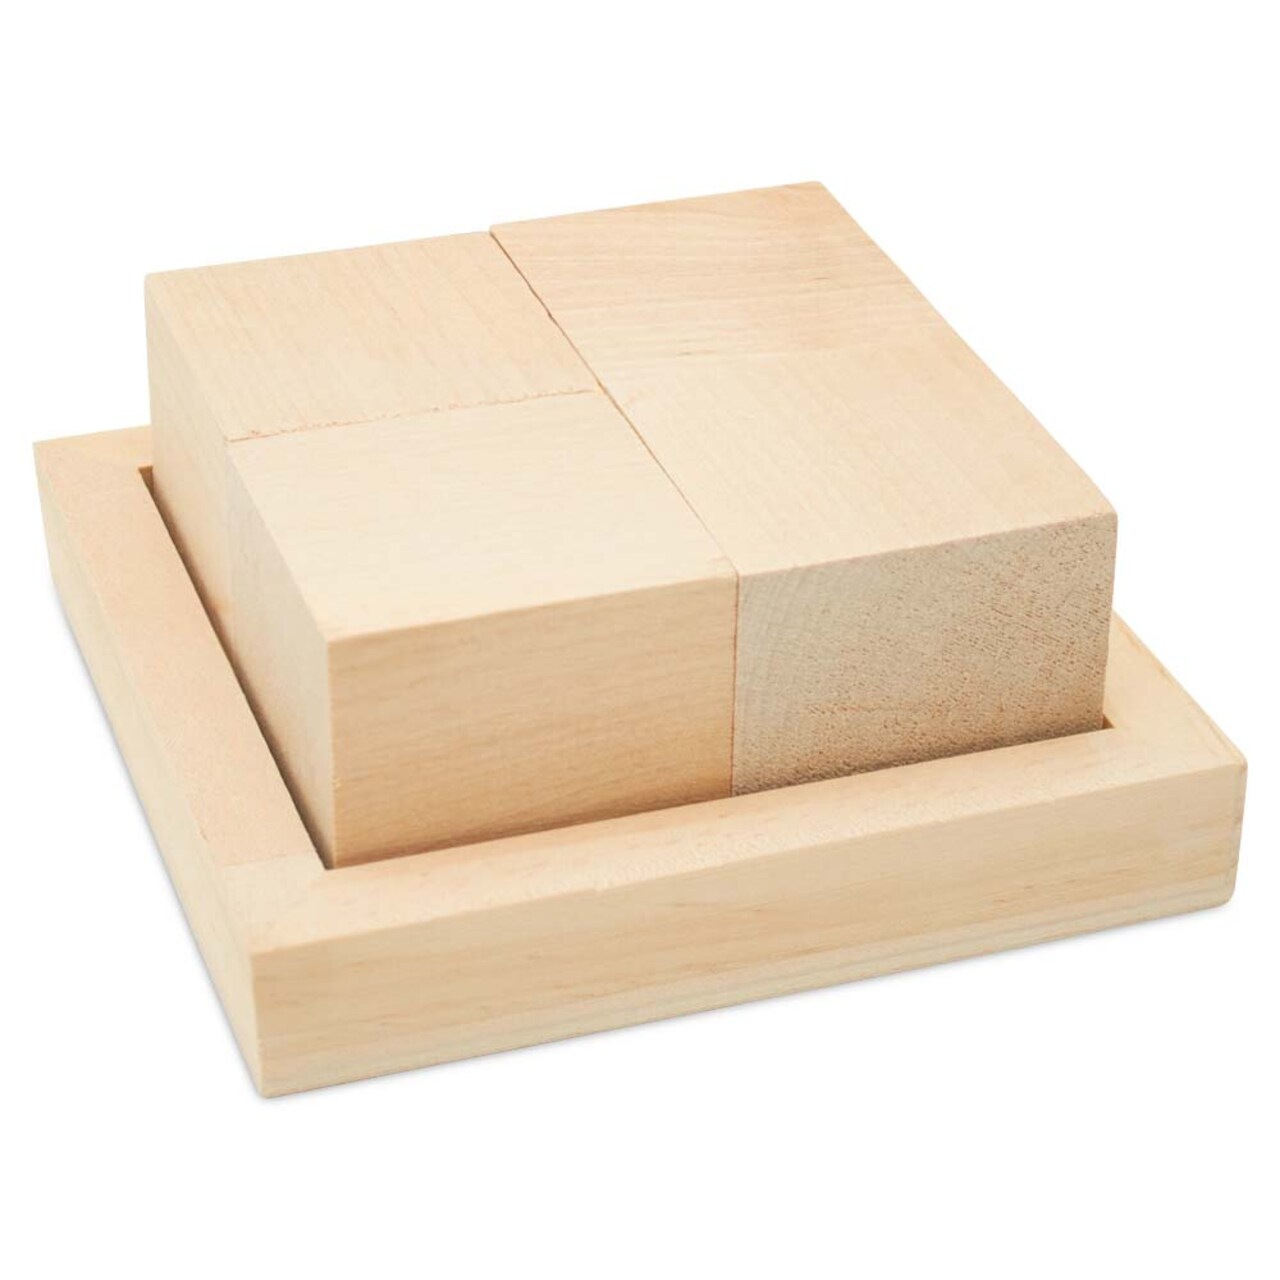 DIY Wood Block Puzzle, 1-3/4 inch Wood Cubes in Wood Tray, 4 or 9